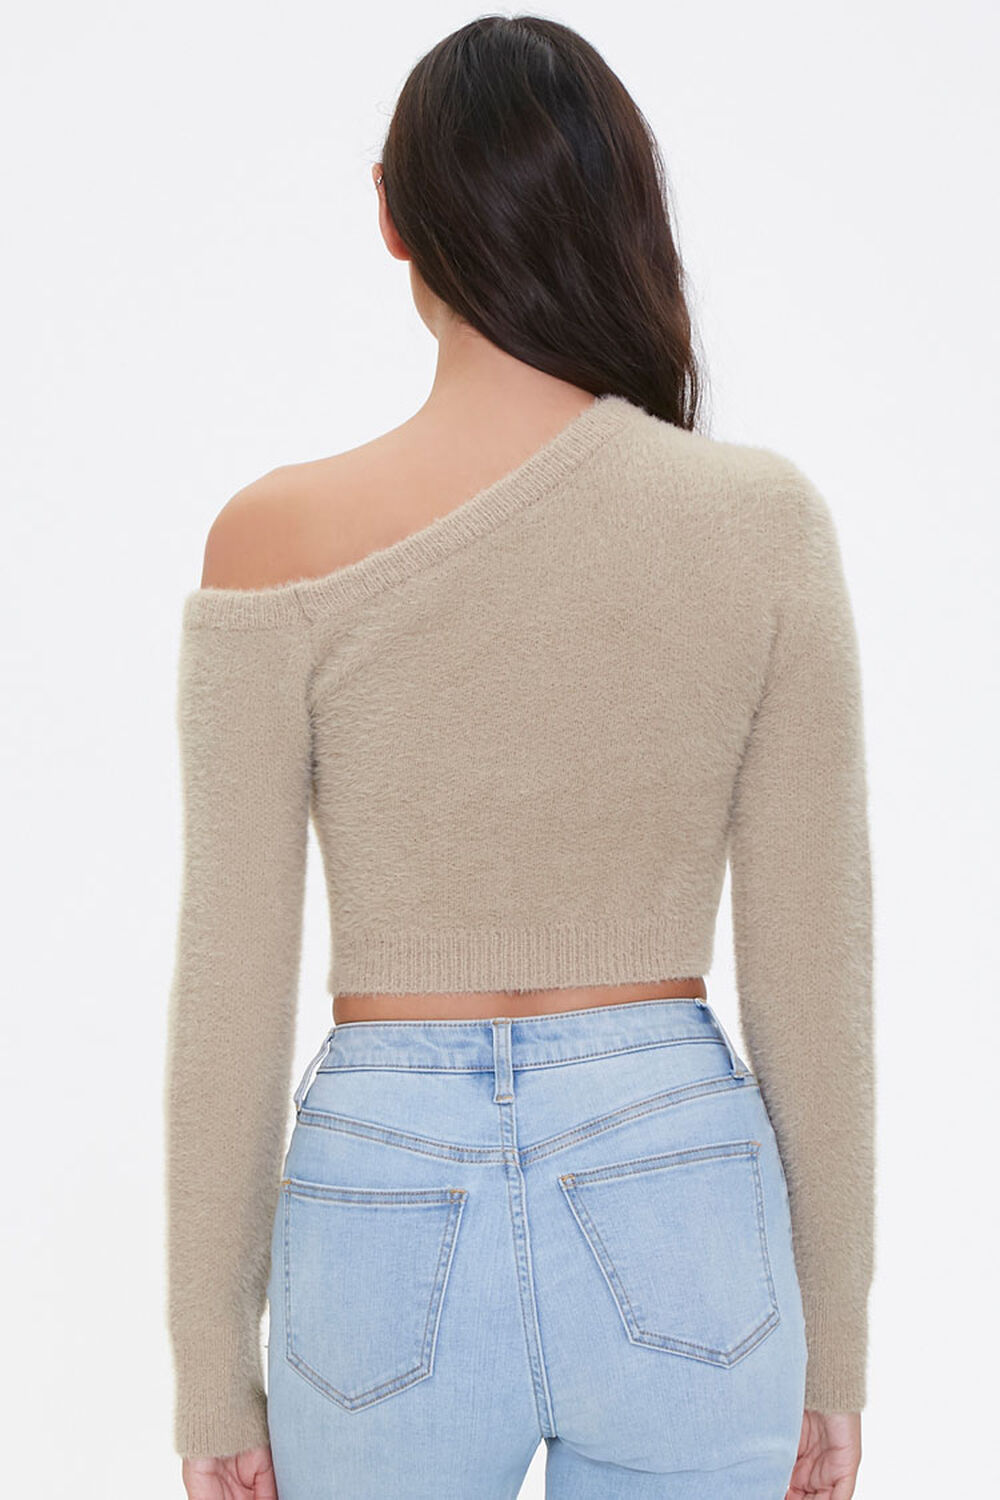 TAN Fuzzy Knit One-Shoulder Sweater, image 3